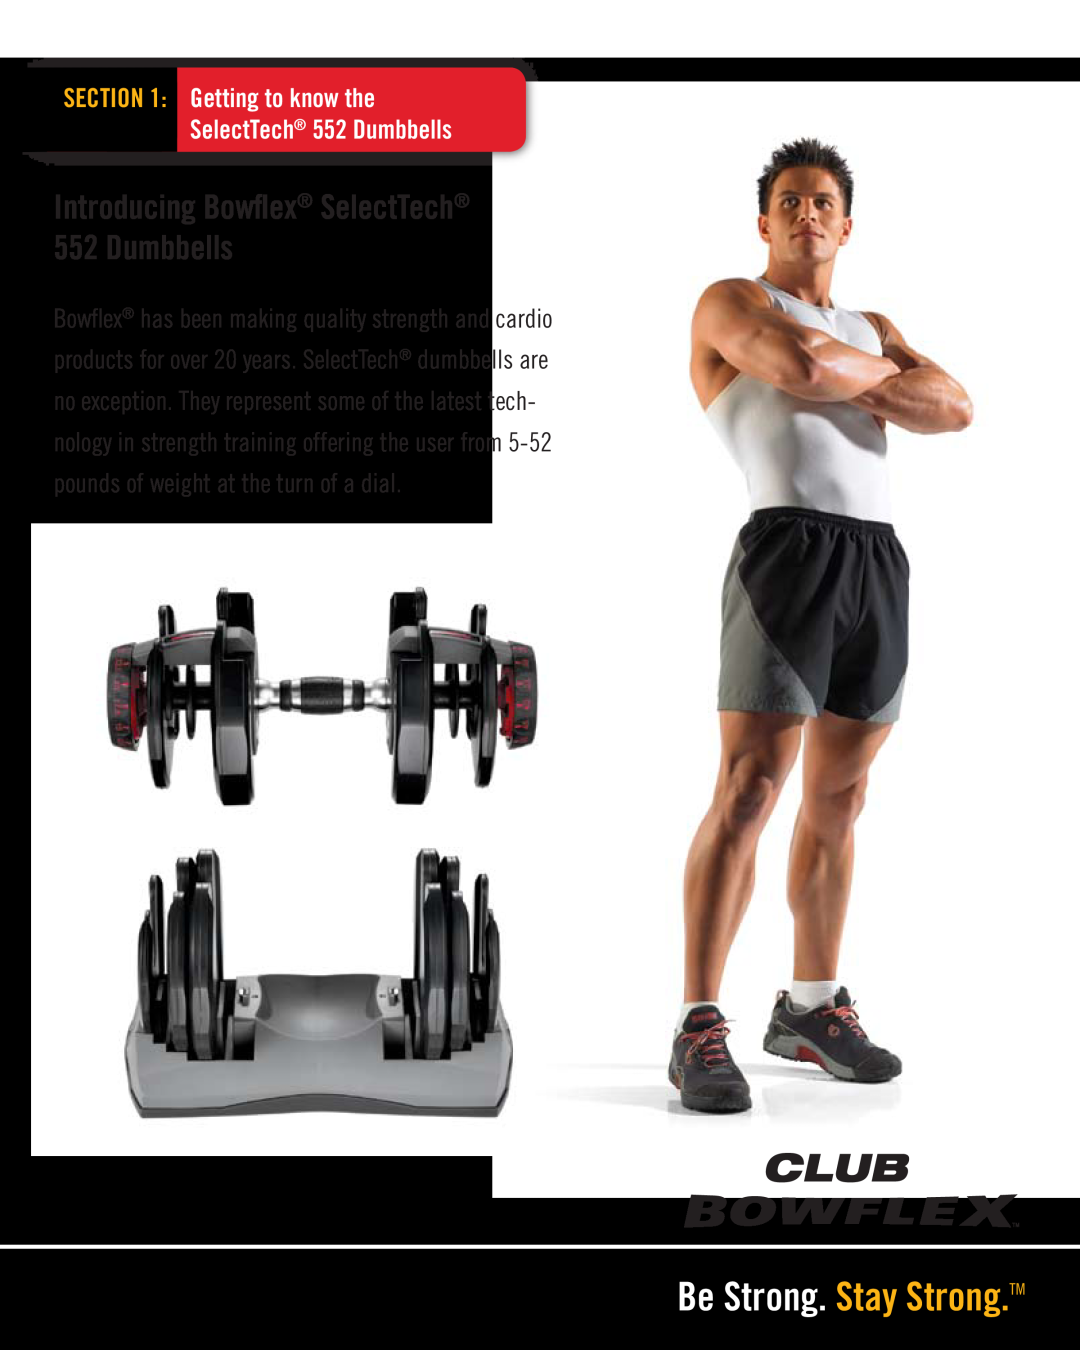 Bowflex manual Be Strong. Stay Strong.TM, Introducing Bowflex SelectTech 552 Dumbbells 